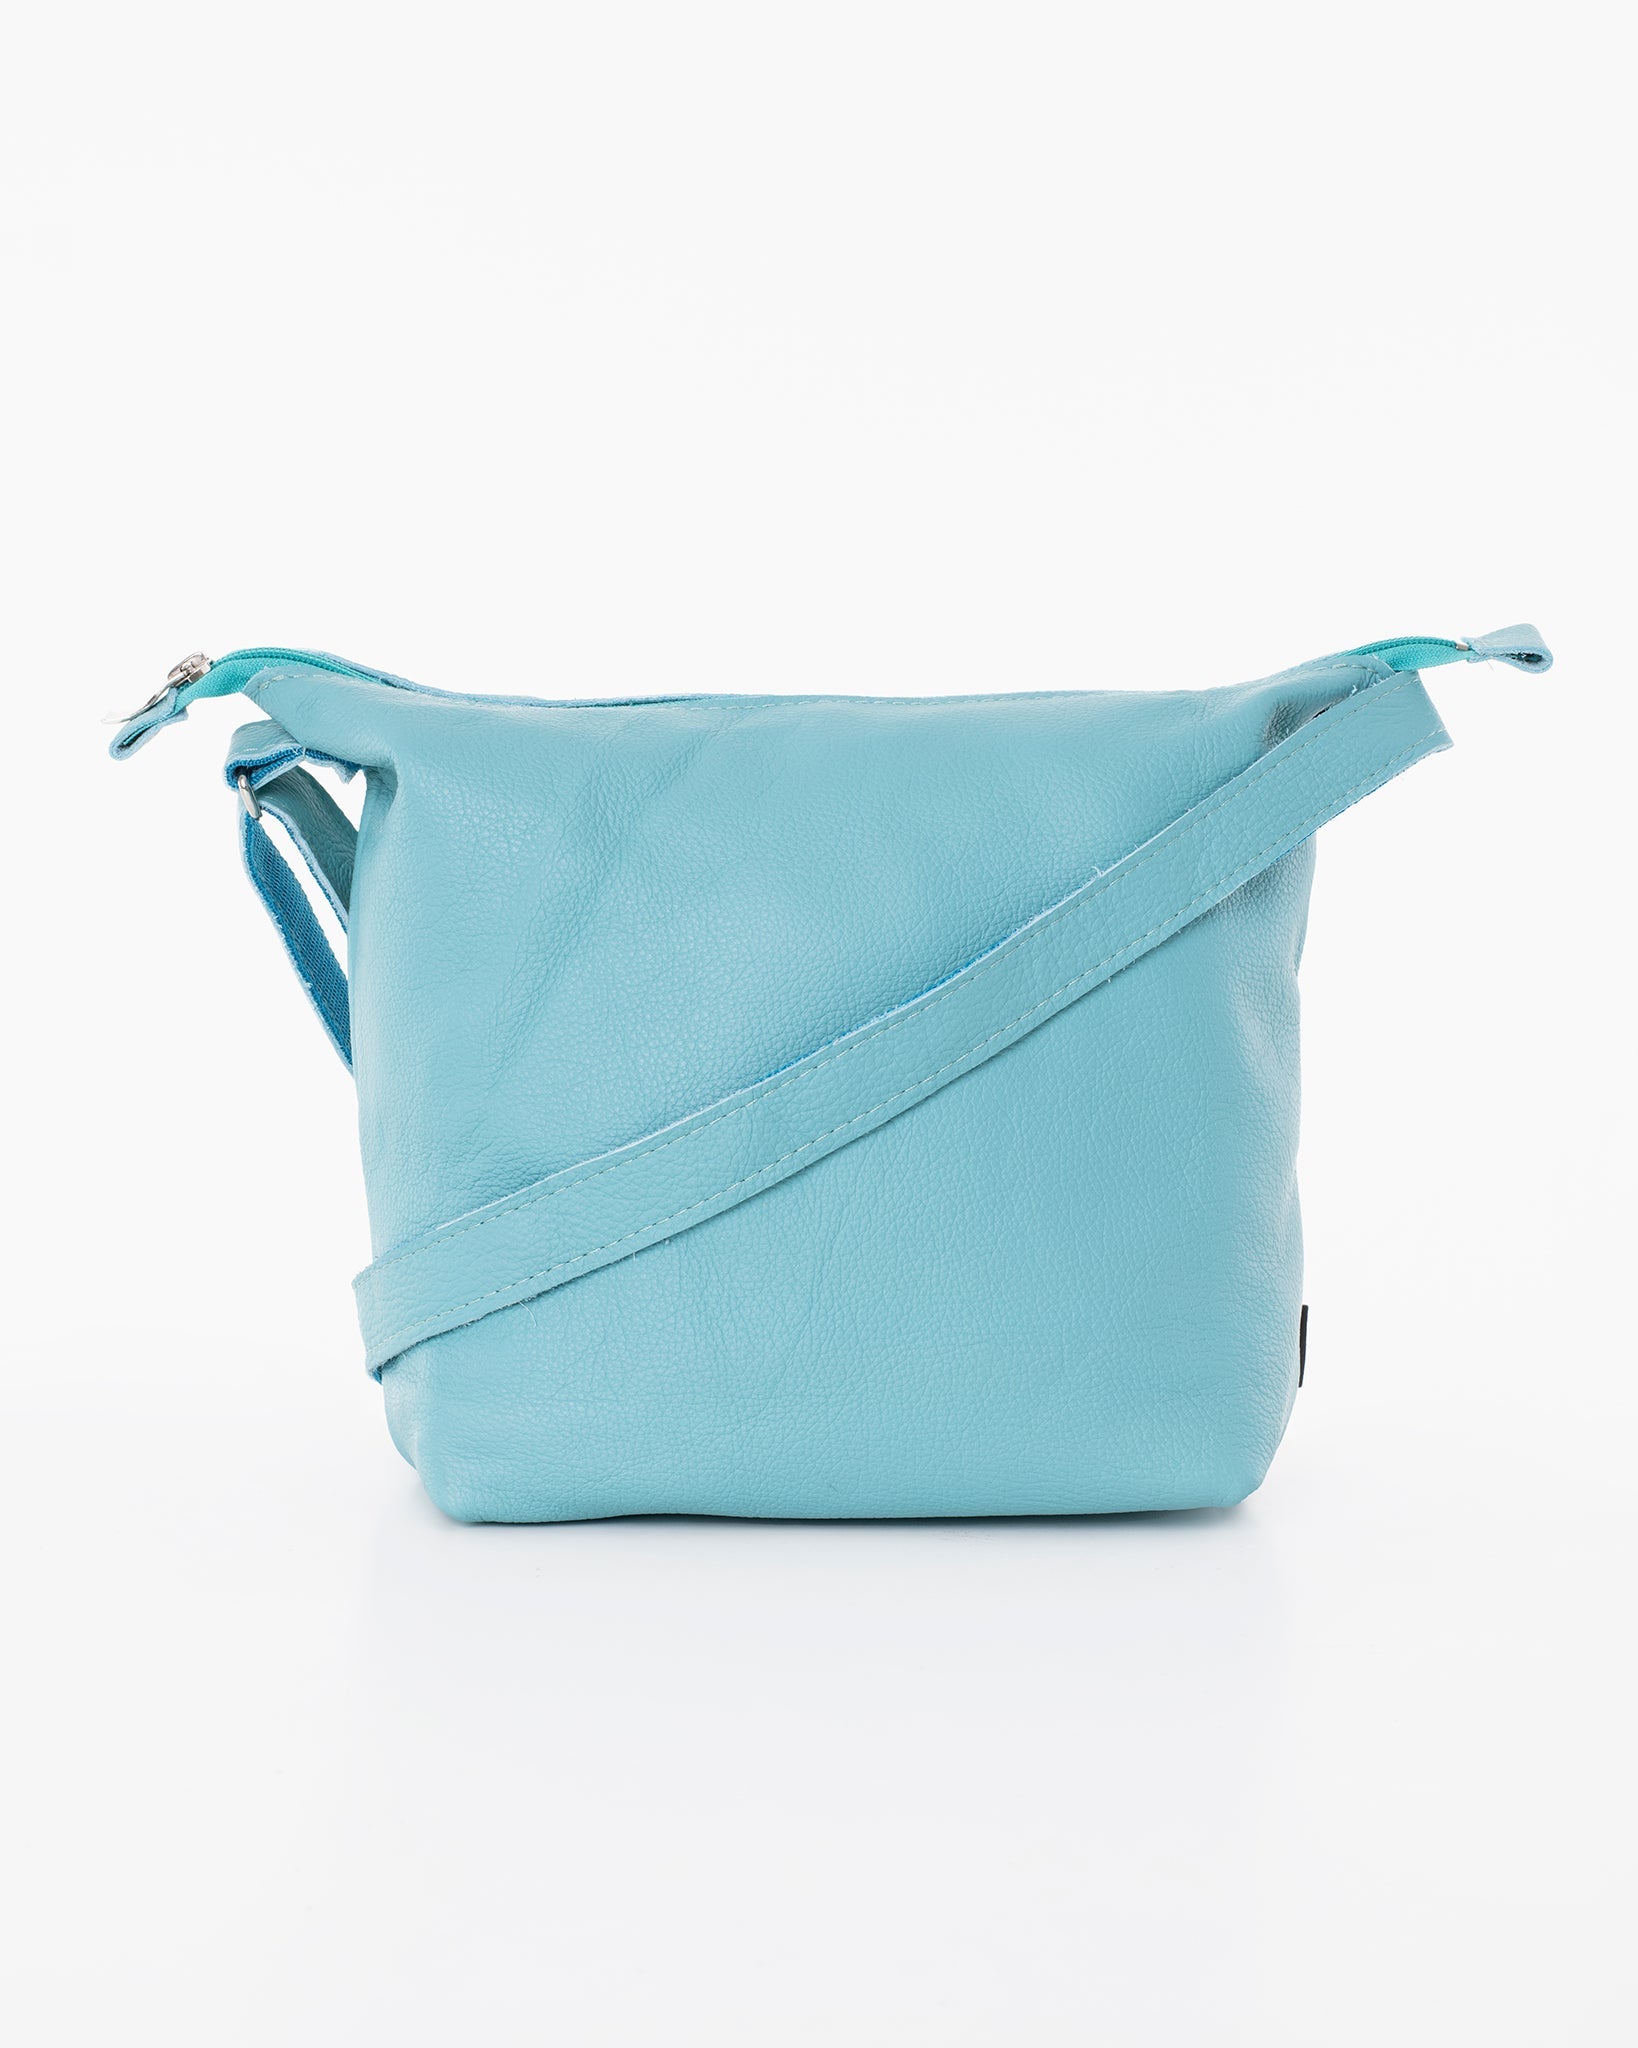 Handmade Suvi XS shoulder bag crafted from blue leather, repurposed from furniture industry leftovers. Unique design, eco-friendly, and durable. Made in Estonia by Trendbag.